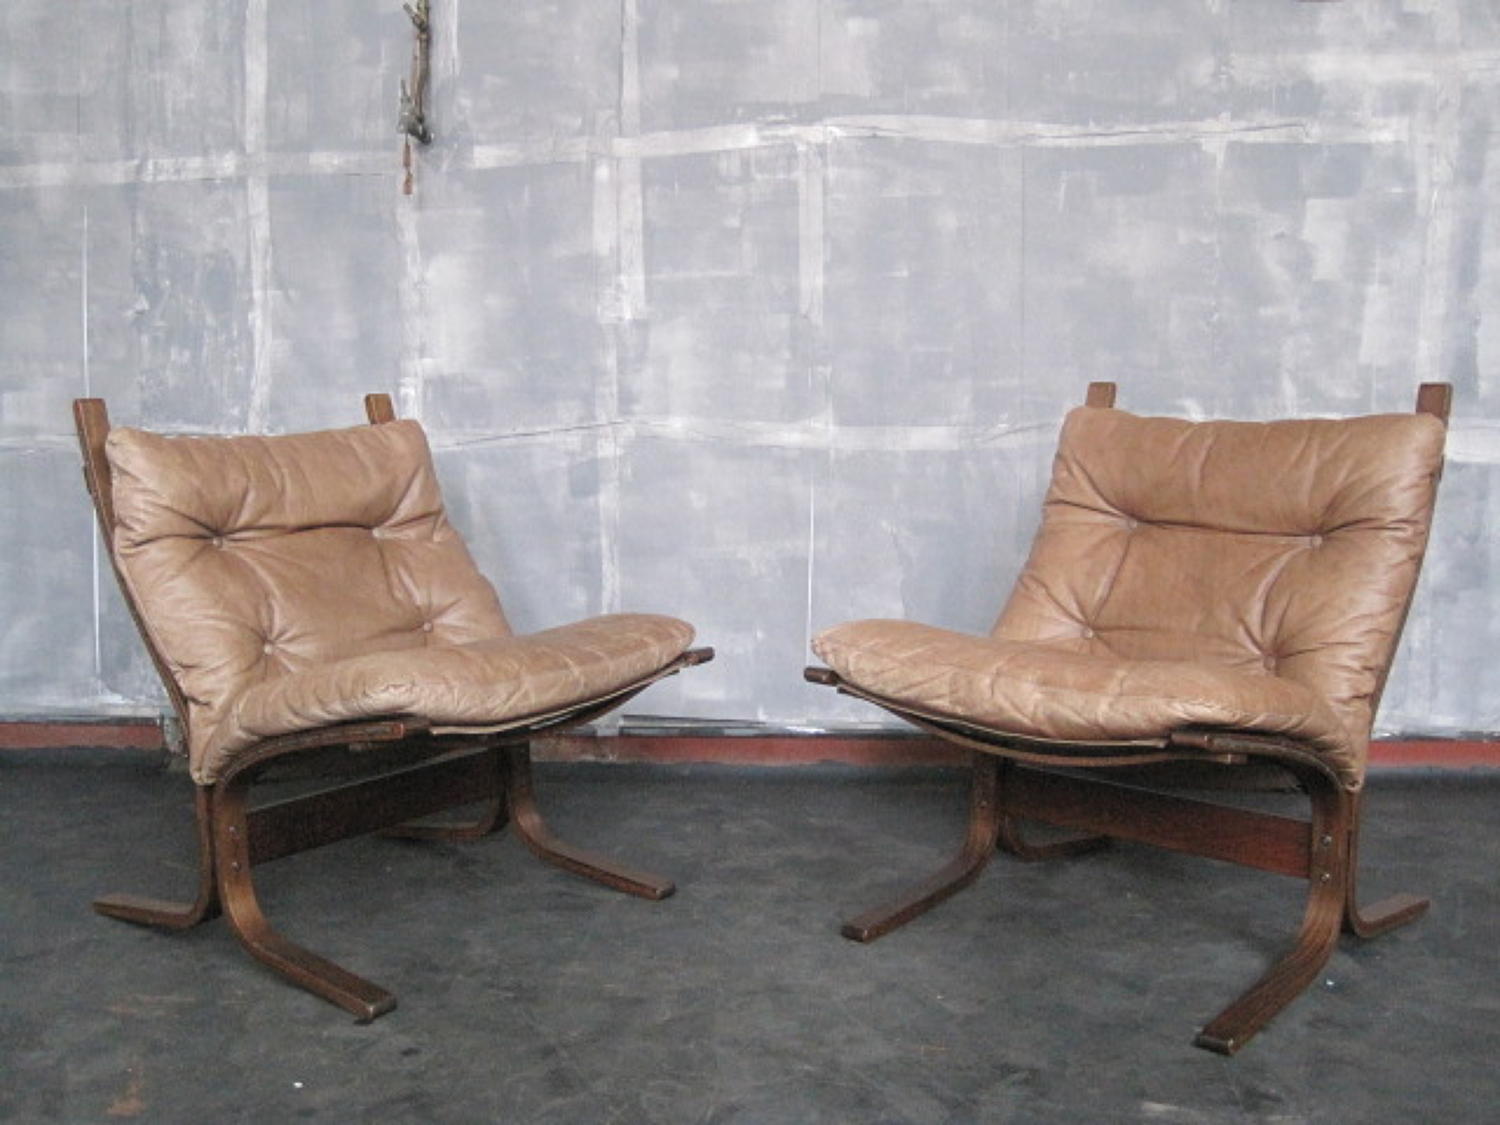 A pair of Siesta chairs by Ingmar Relling